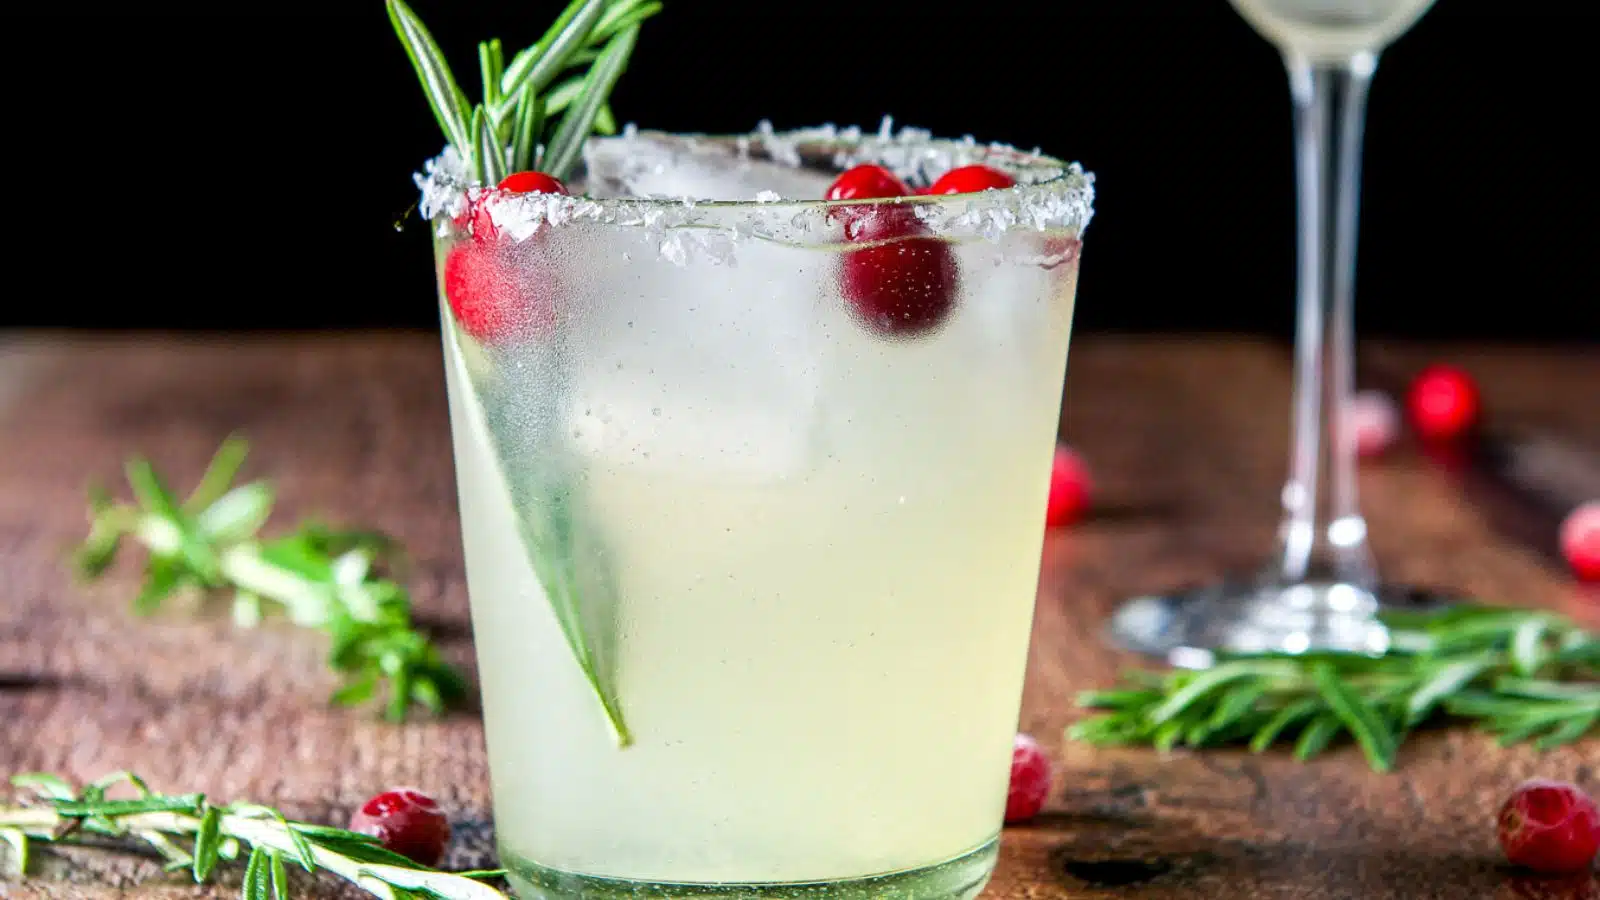 A salt rimmed glass filled with the margarita with rosemary and cranberries in it